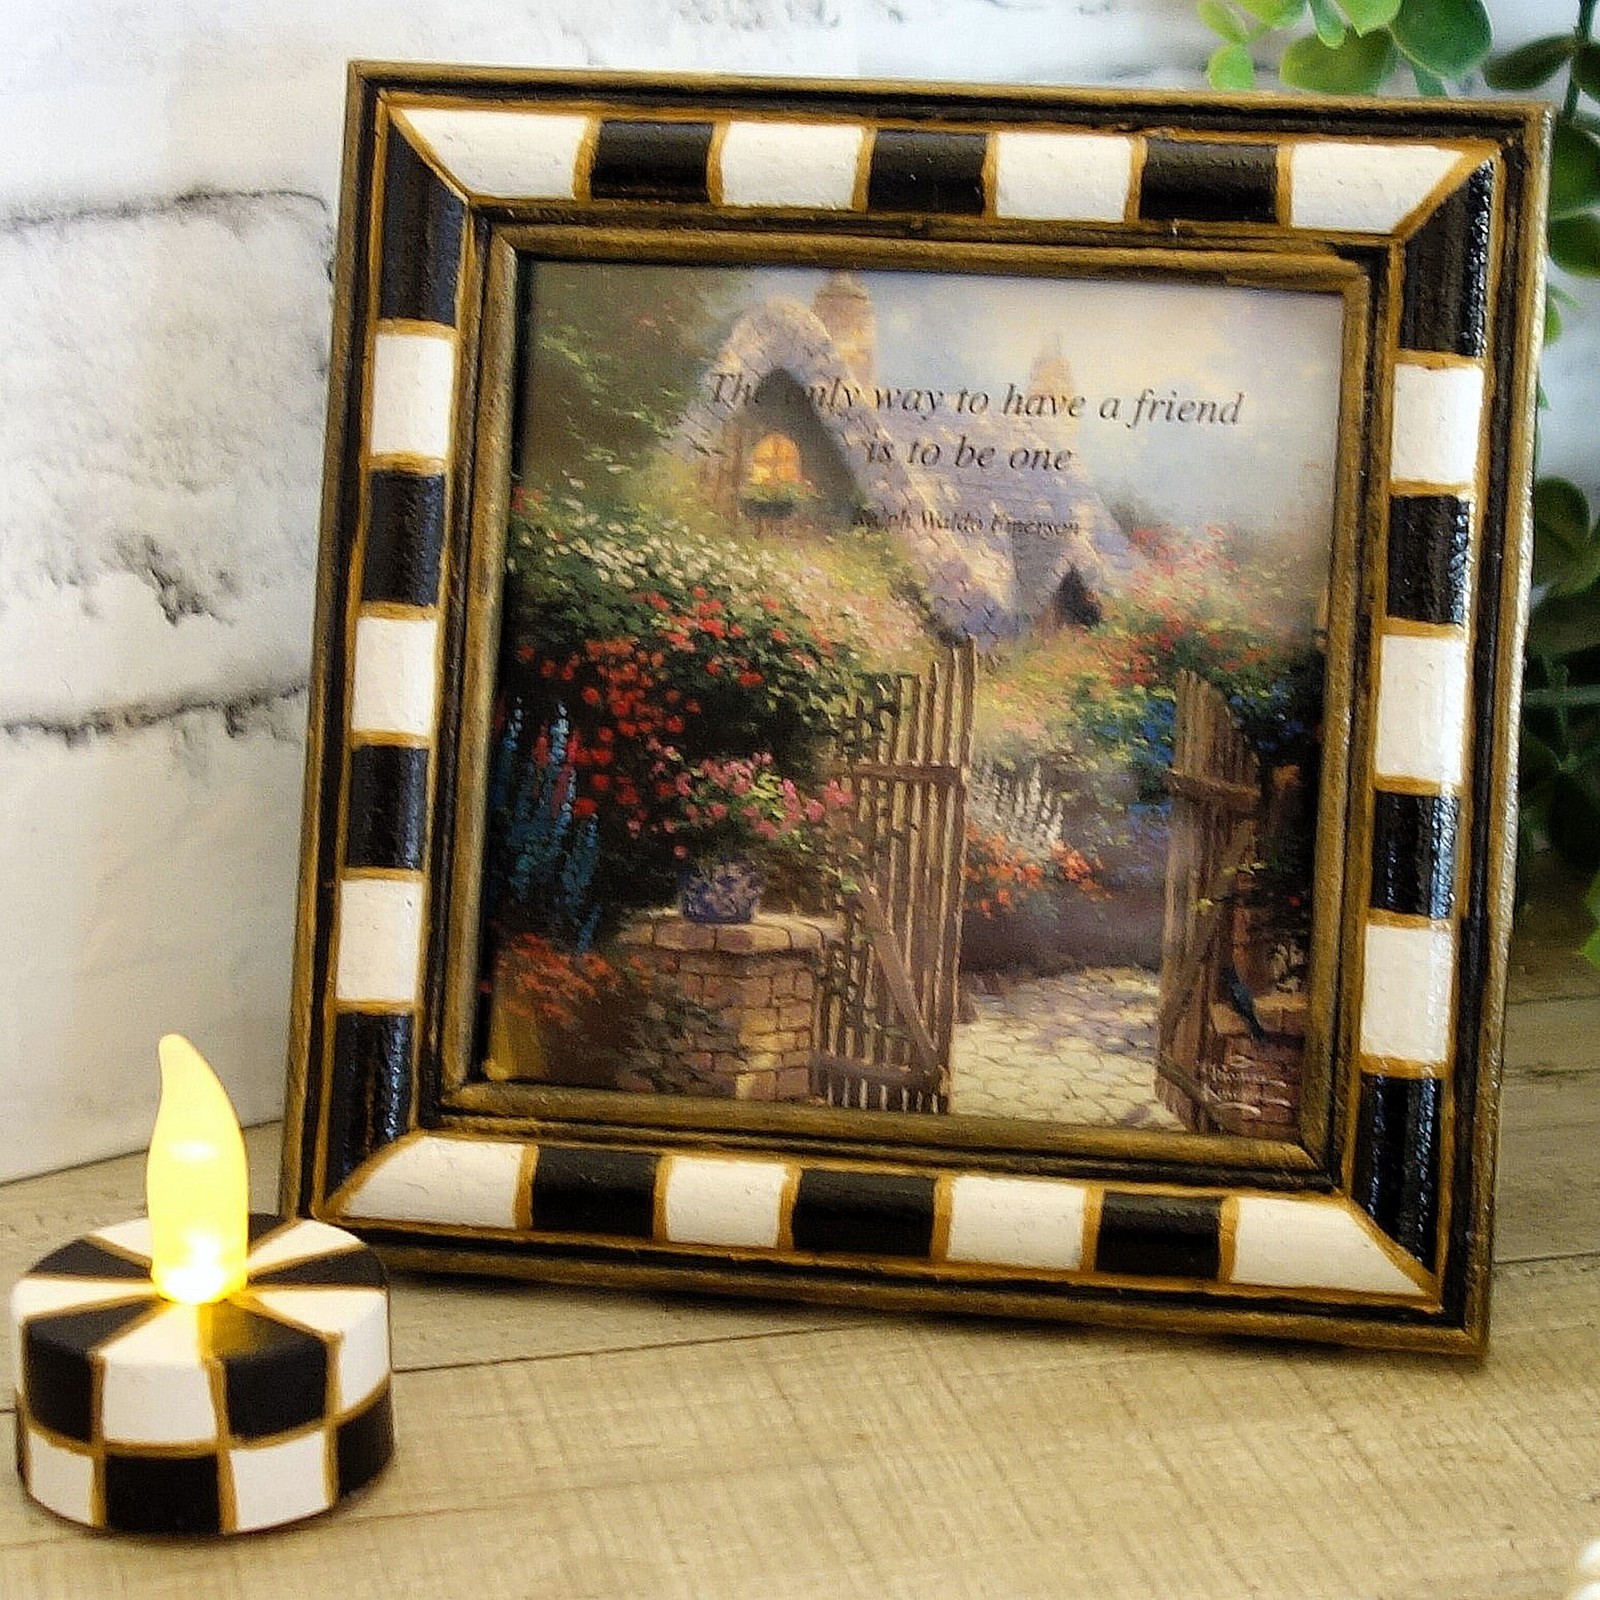 Courtly Picture Thomas Kinkade Print Checked Picture and Checked Tealight Candle - $34.00